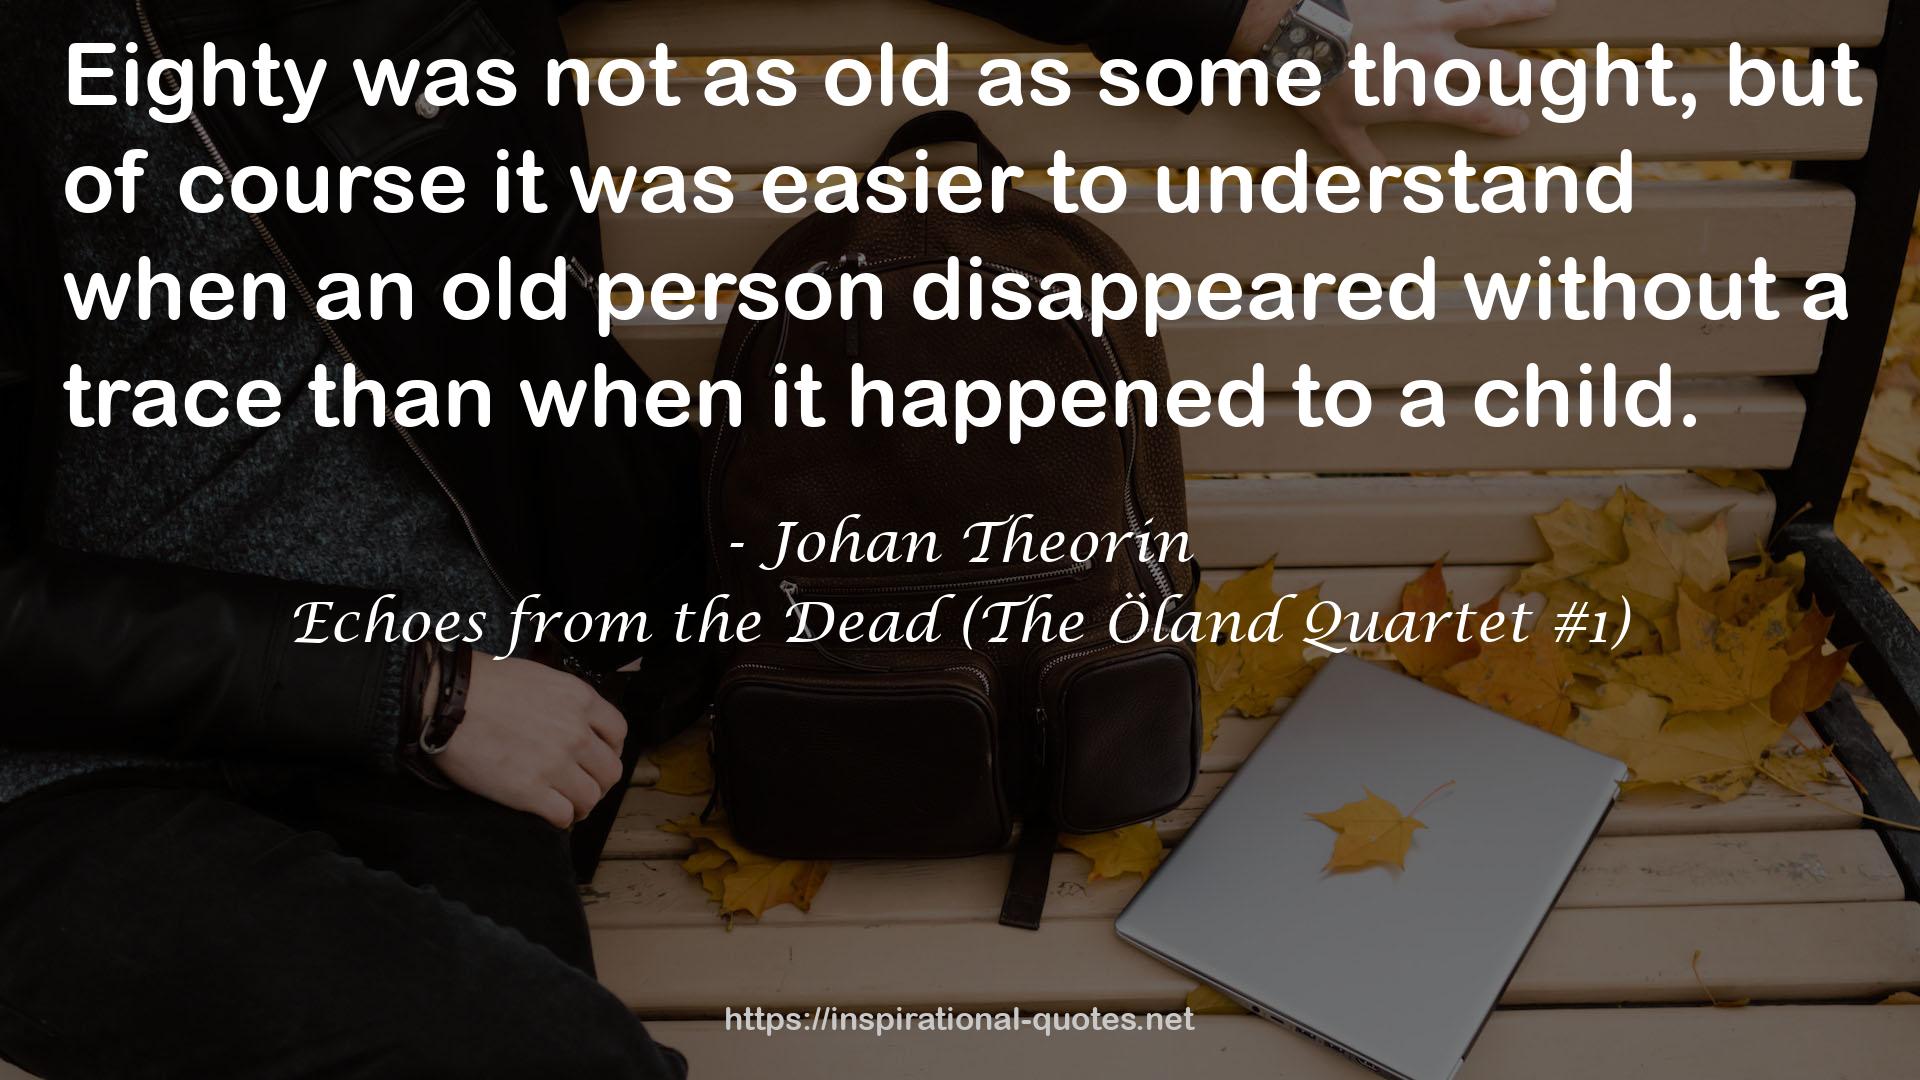 Echoes from the Dead (The Öland Quartet #1) QUOTES